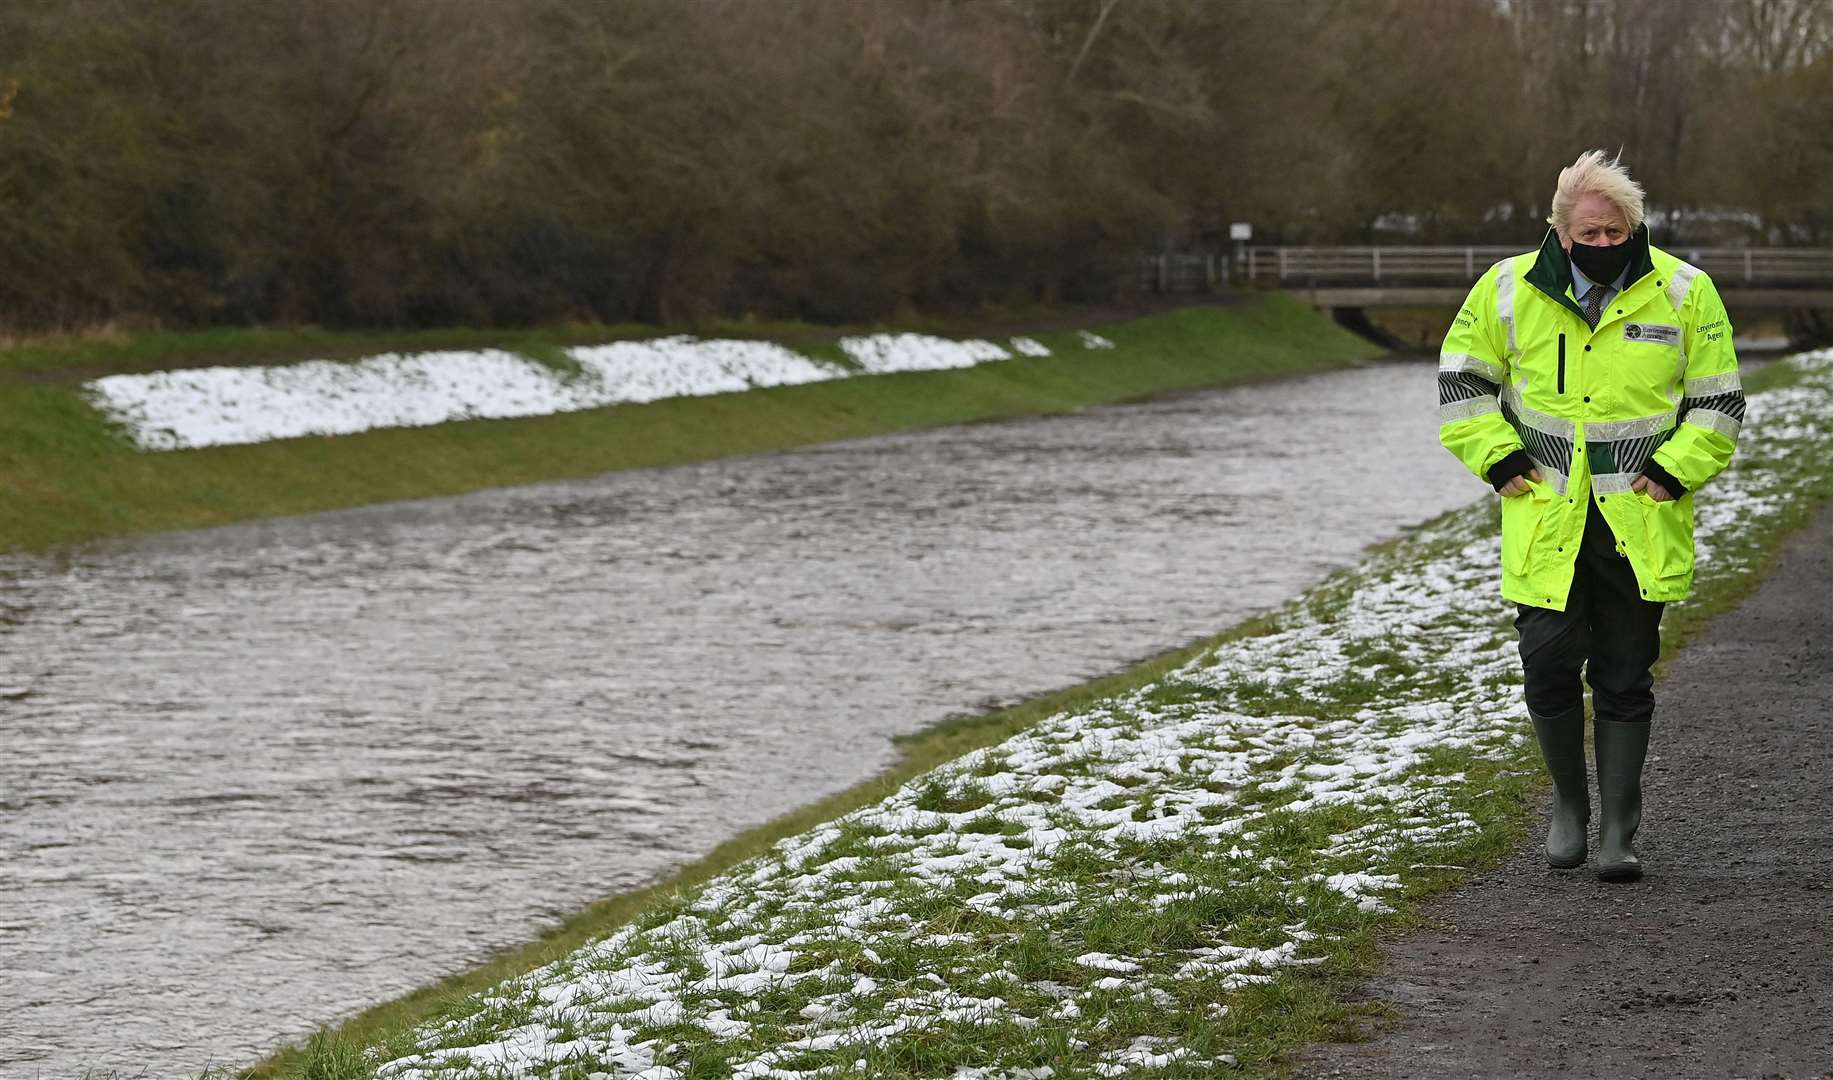 The Prime Minister during a visit to a storm basin near the River Mersey in Didsbury (Paul Ellis/PA)